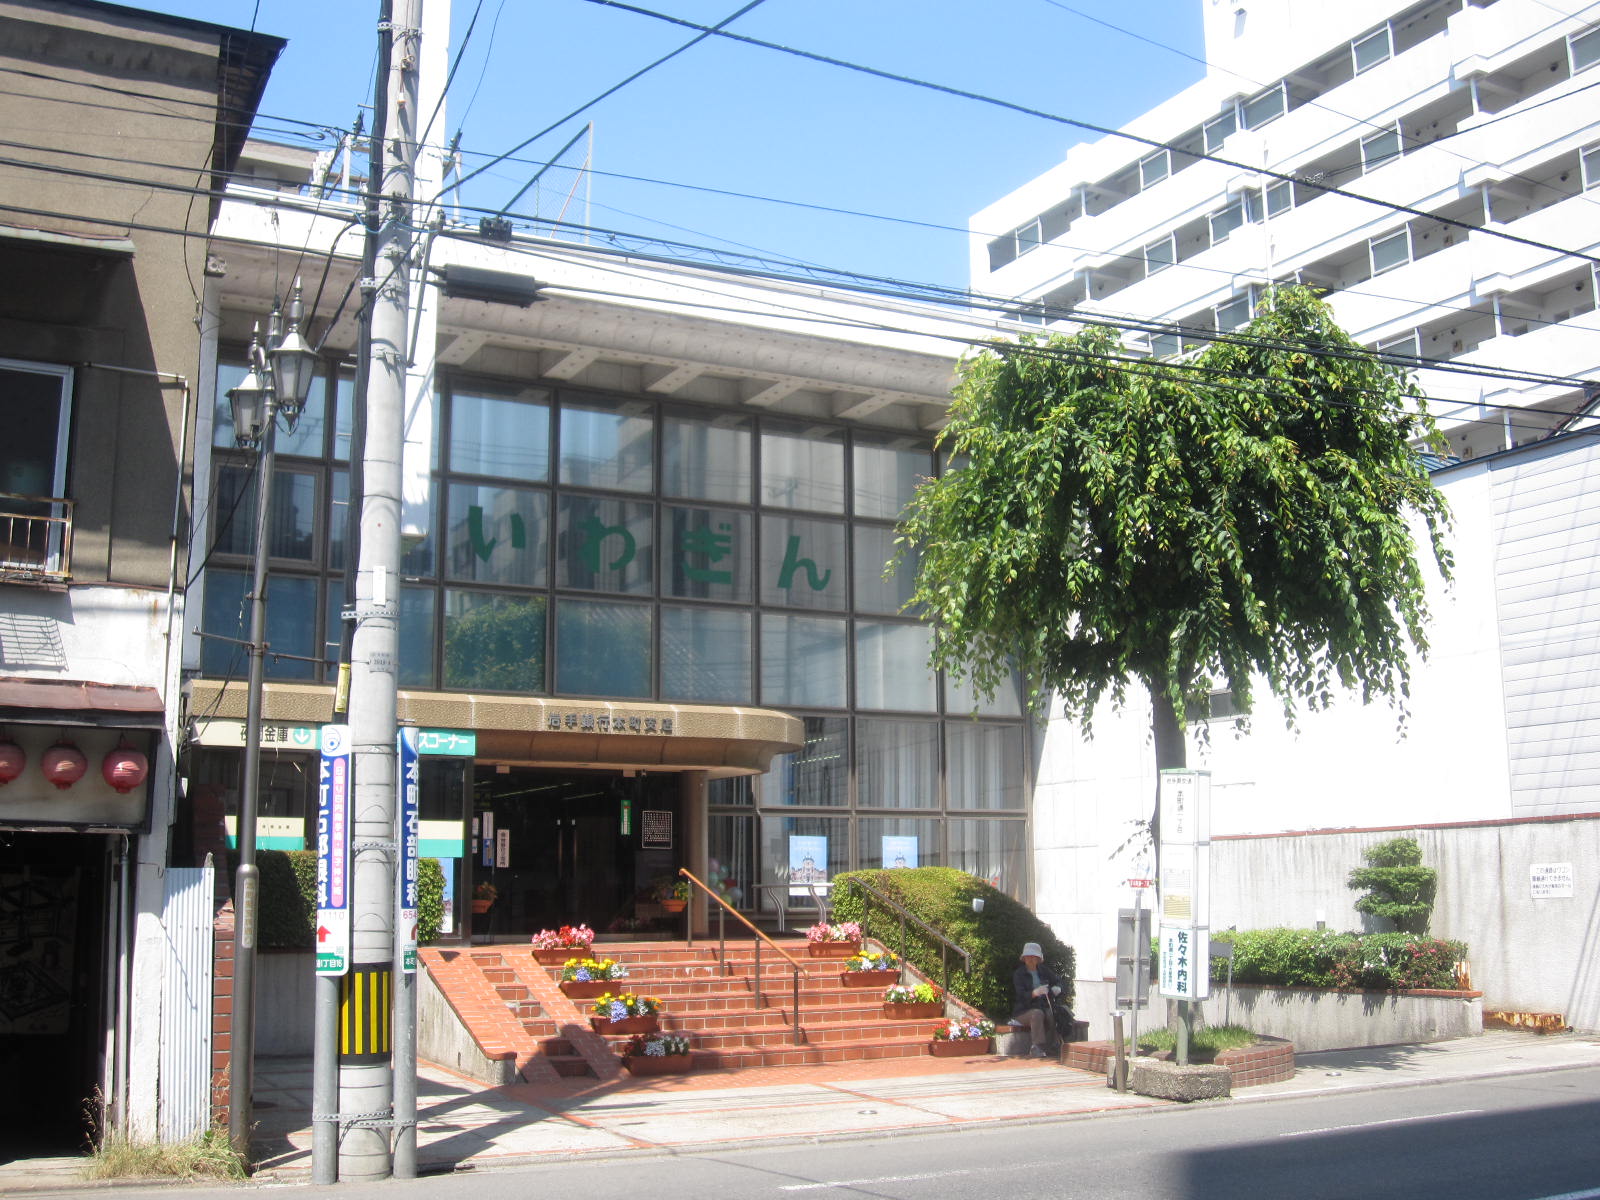 Bank. Iwate Hon 237m to the branch (Bank)